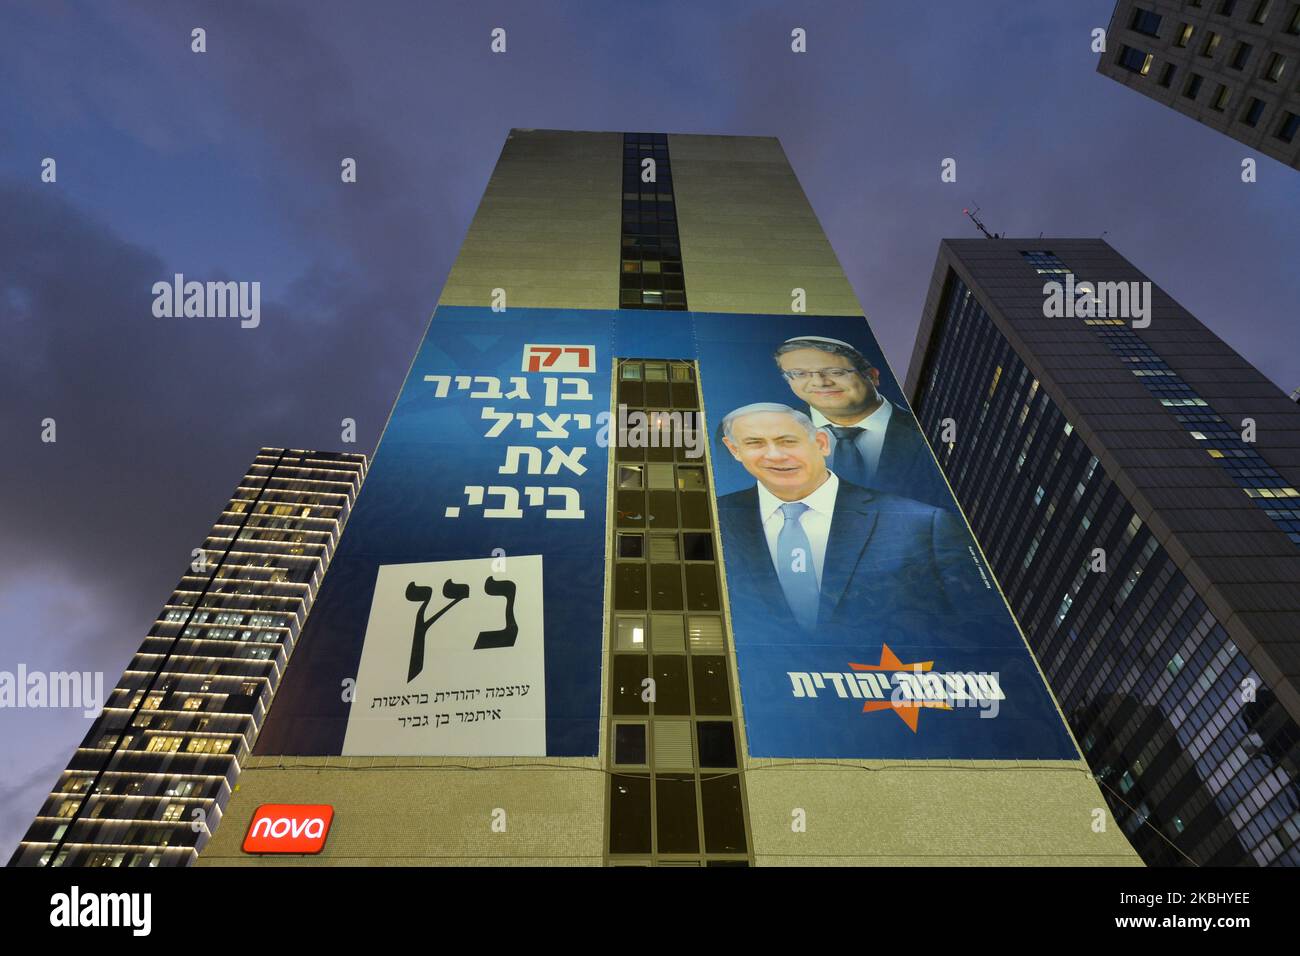 An election campaign poster for far-right Otzma Yehudit (Jewish Power) with images of party leader Itamar Ben-Gvir behind Benjamin Netanyahu, Israeli PM and Likud Party leader. Israelis head to the polls for the third election in less than a year on March 2nd. On Tuesday, February 25, 2020, in Ramat Gan, Tel Aviv District, Israel. (Photo by Artur Widak/NurPhoto) Stock Photo